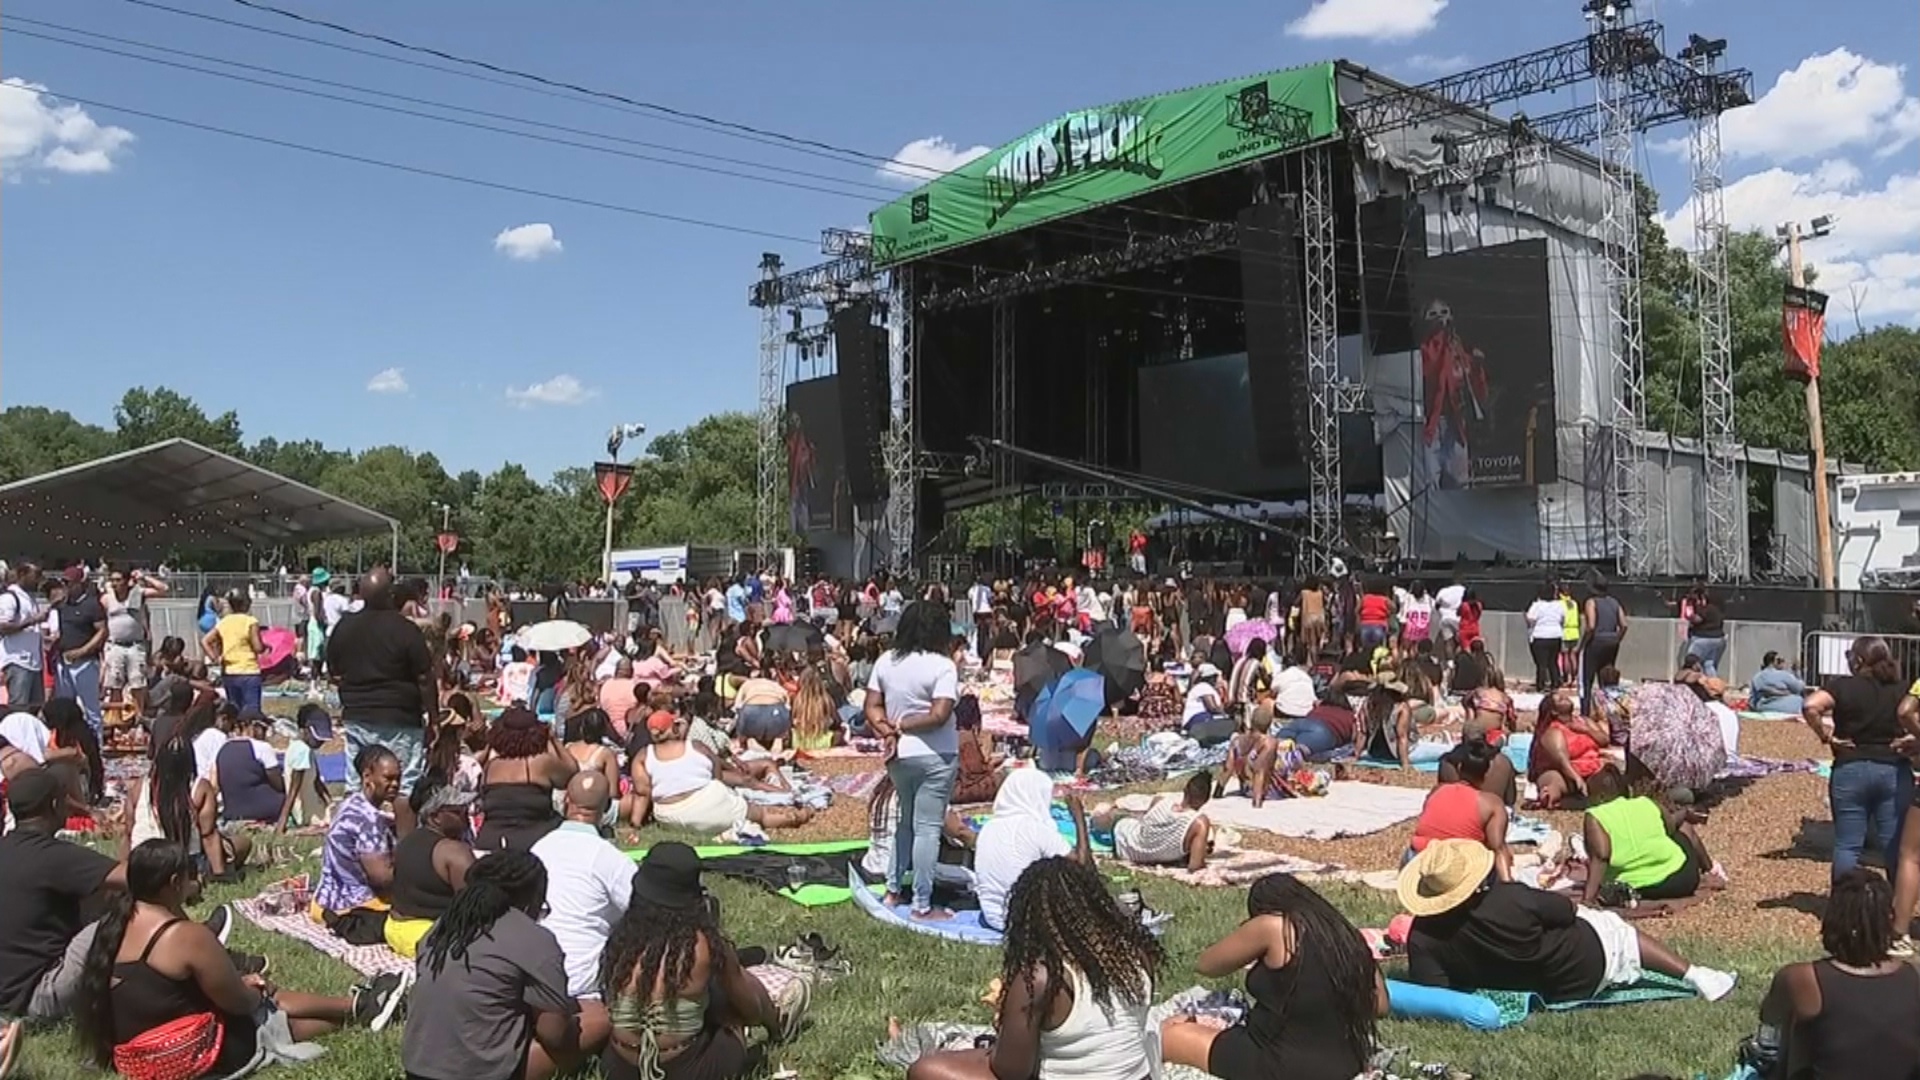 Attendees Enjoy Return Of Roots Picnic To Philadelphia After 2 Year Pandemic Pause: 'It Feels Like We're Getting Back To Normal'